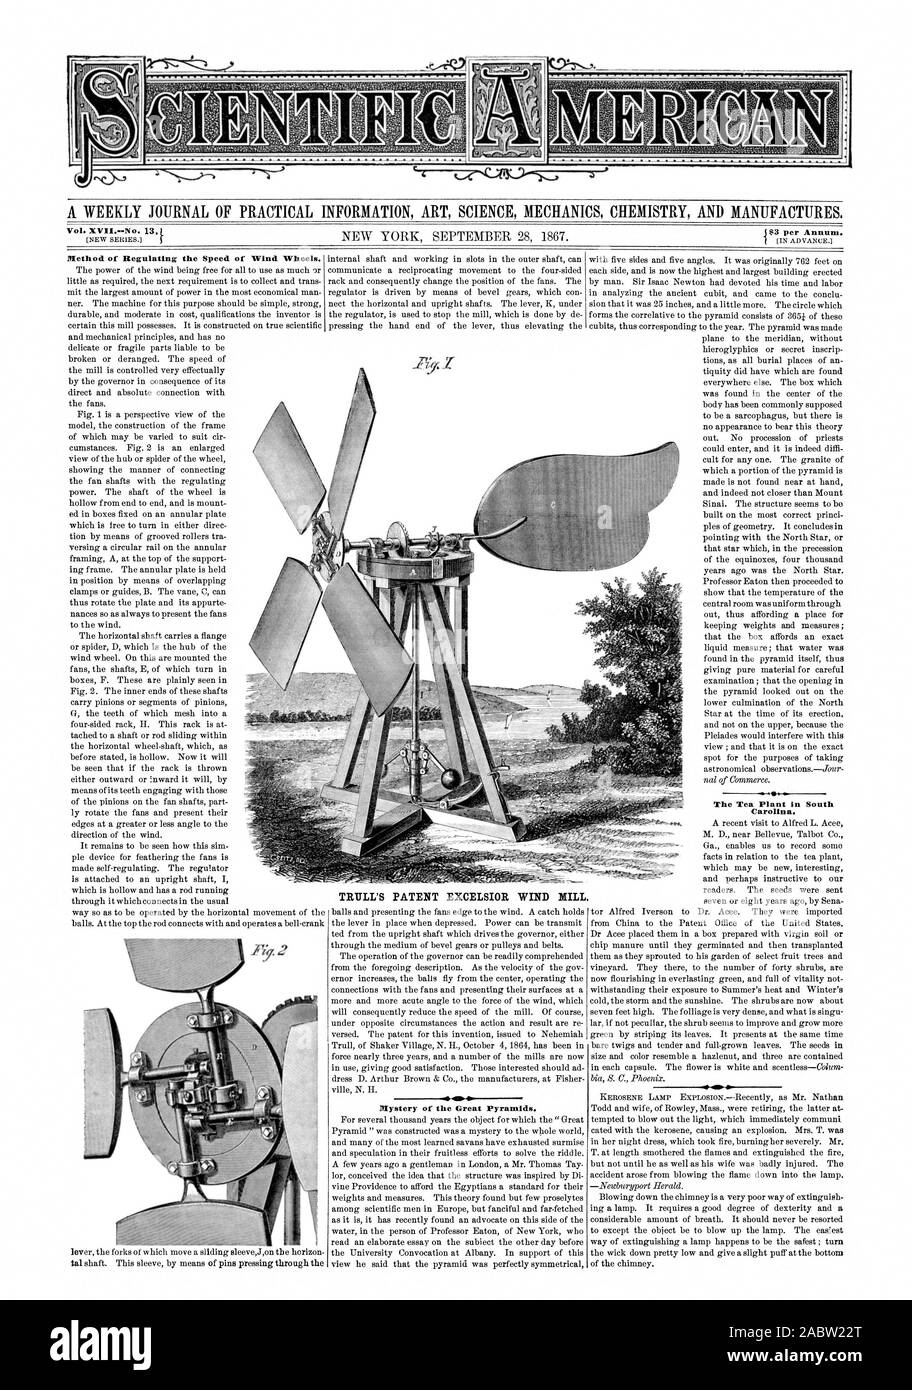 Method of Regulating the Speed of Wind Wheels. TRITLL'S PATENT EXCELSIOR WIND MILL 41 41. Mystery of the Great Pyramids. The Tea Plant in South Carolina., scientific american, 1867-09-28 Stock Photo